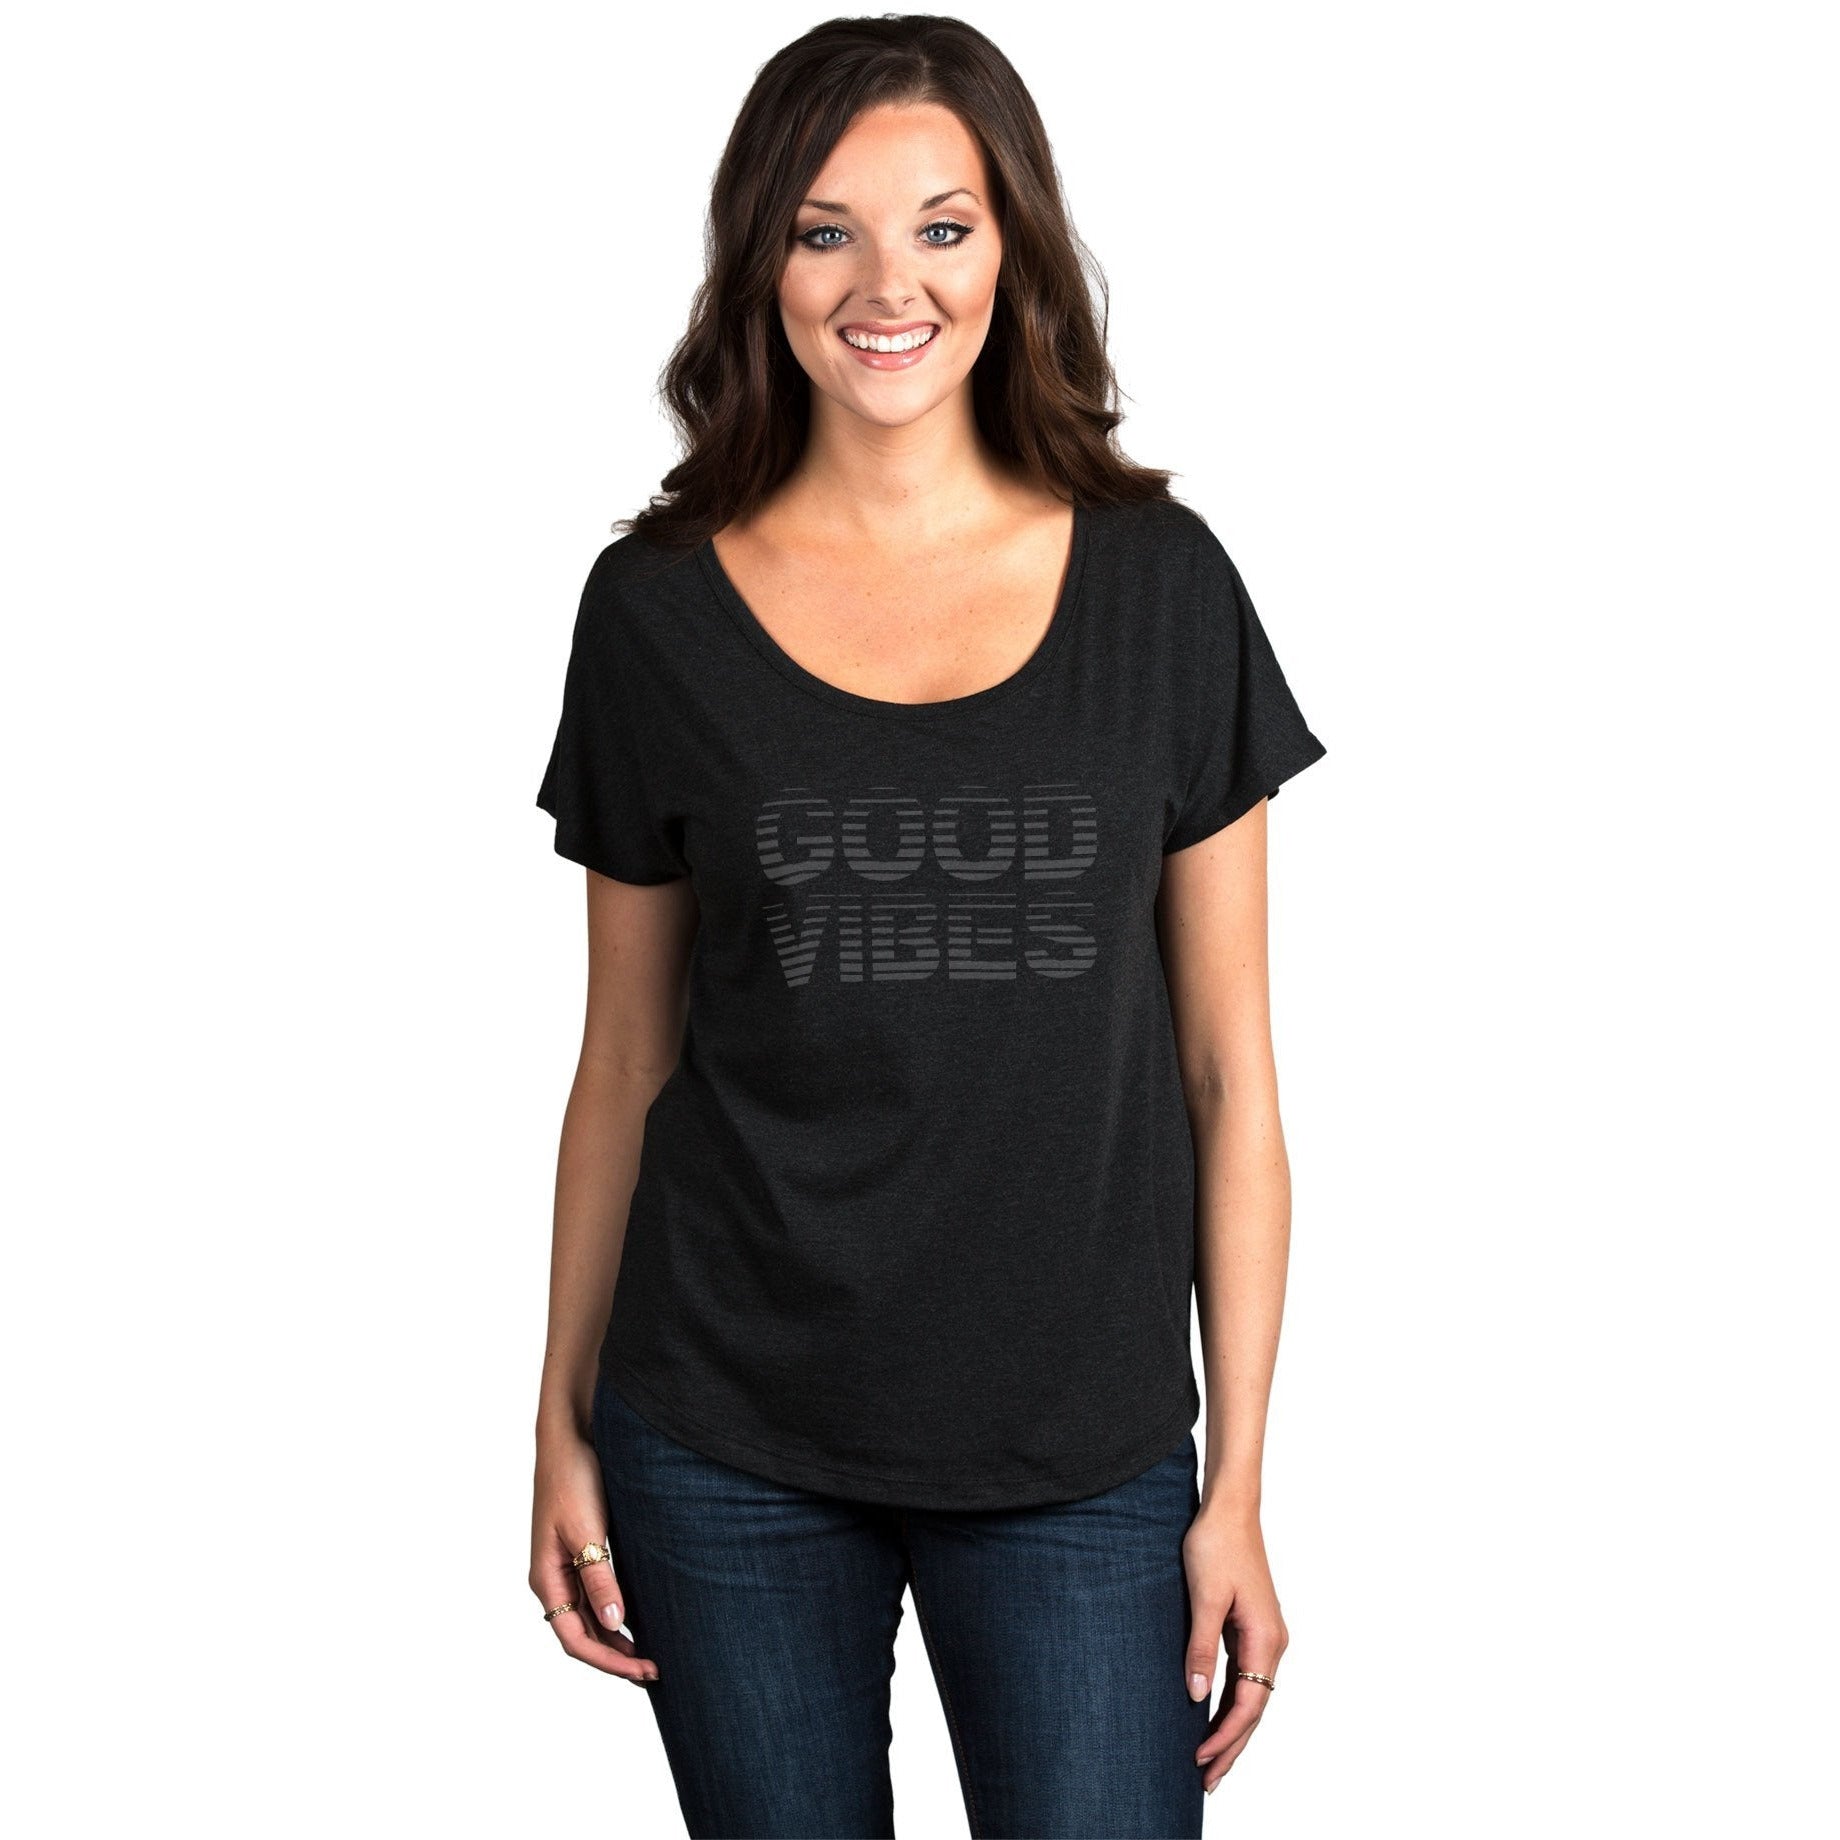 Good Vibes Women's Relaxed Slouchy Dolman T-Shirt Tee Heather Black Model
